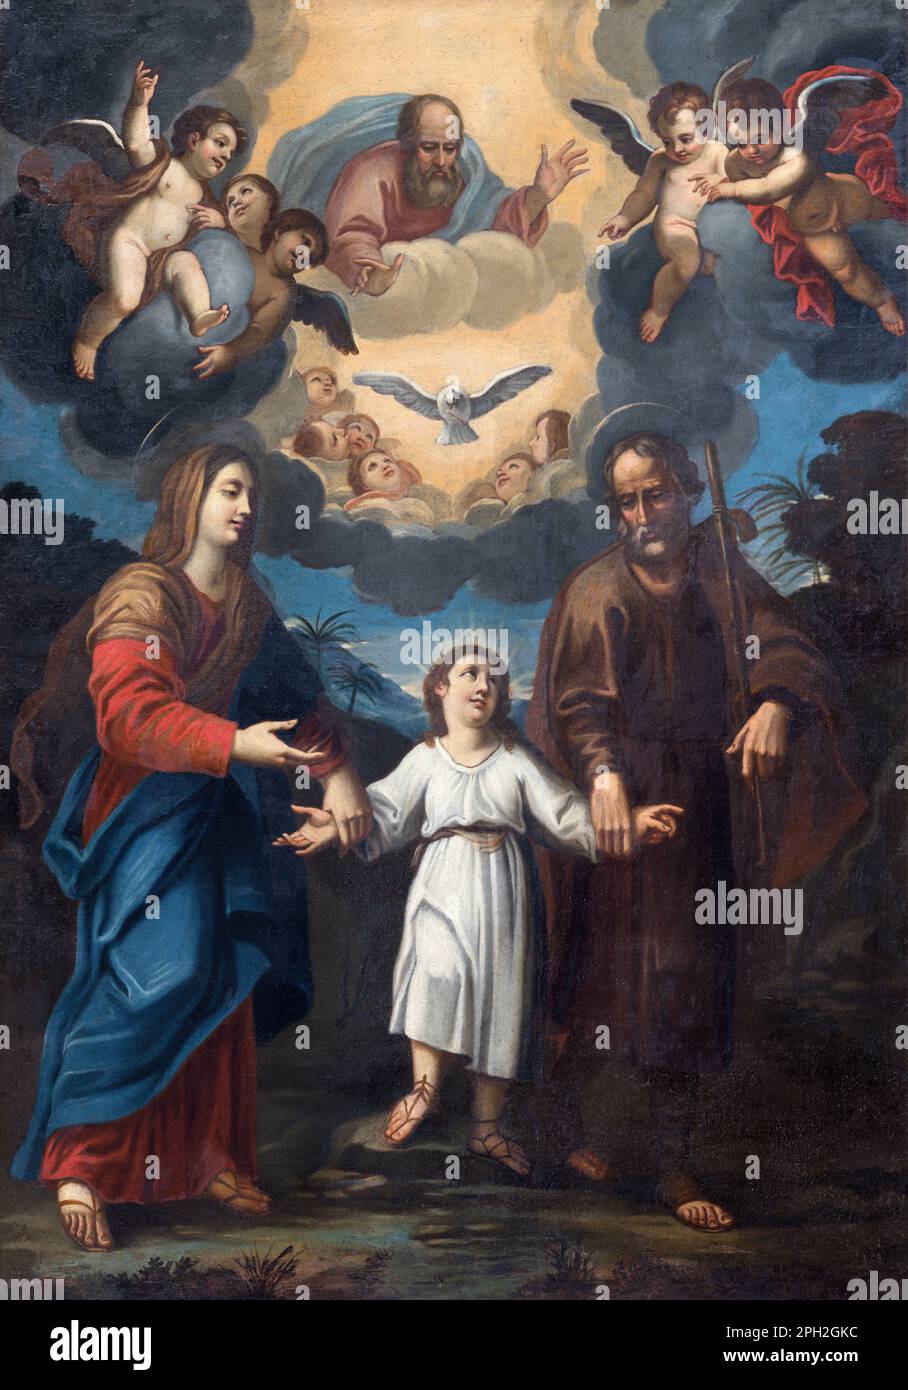 GENOVA, ITALY - MARCH 7, 2023: The painting of Holy Family in the church Chiesa del Sacro Cuore e San Giacomo by unknown artist. Stock Photo